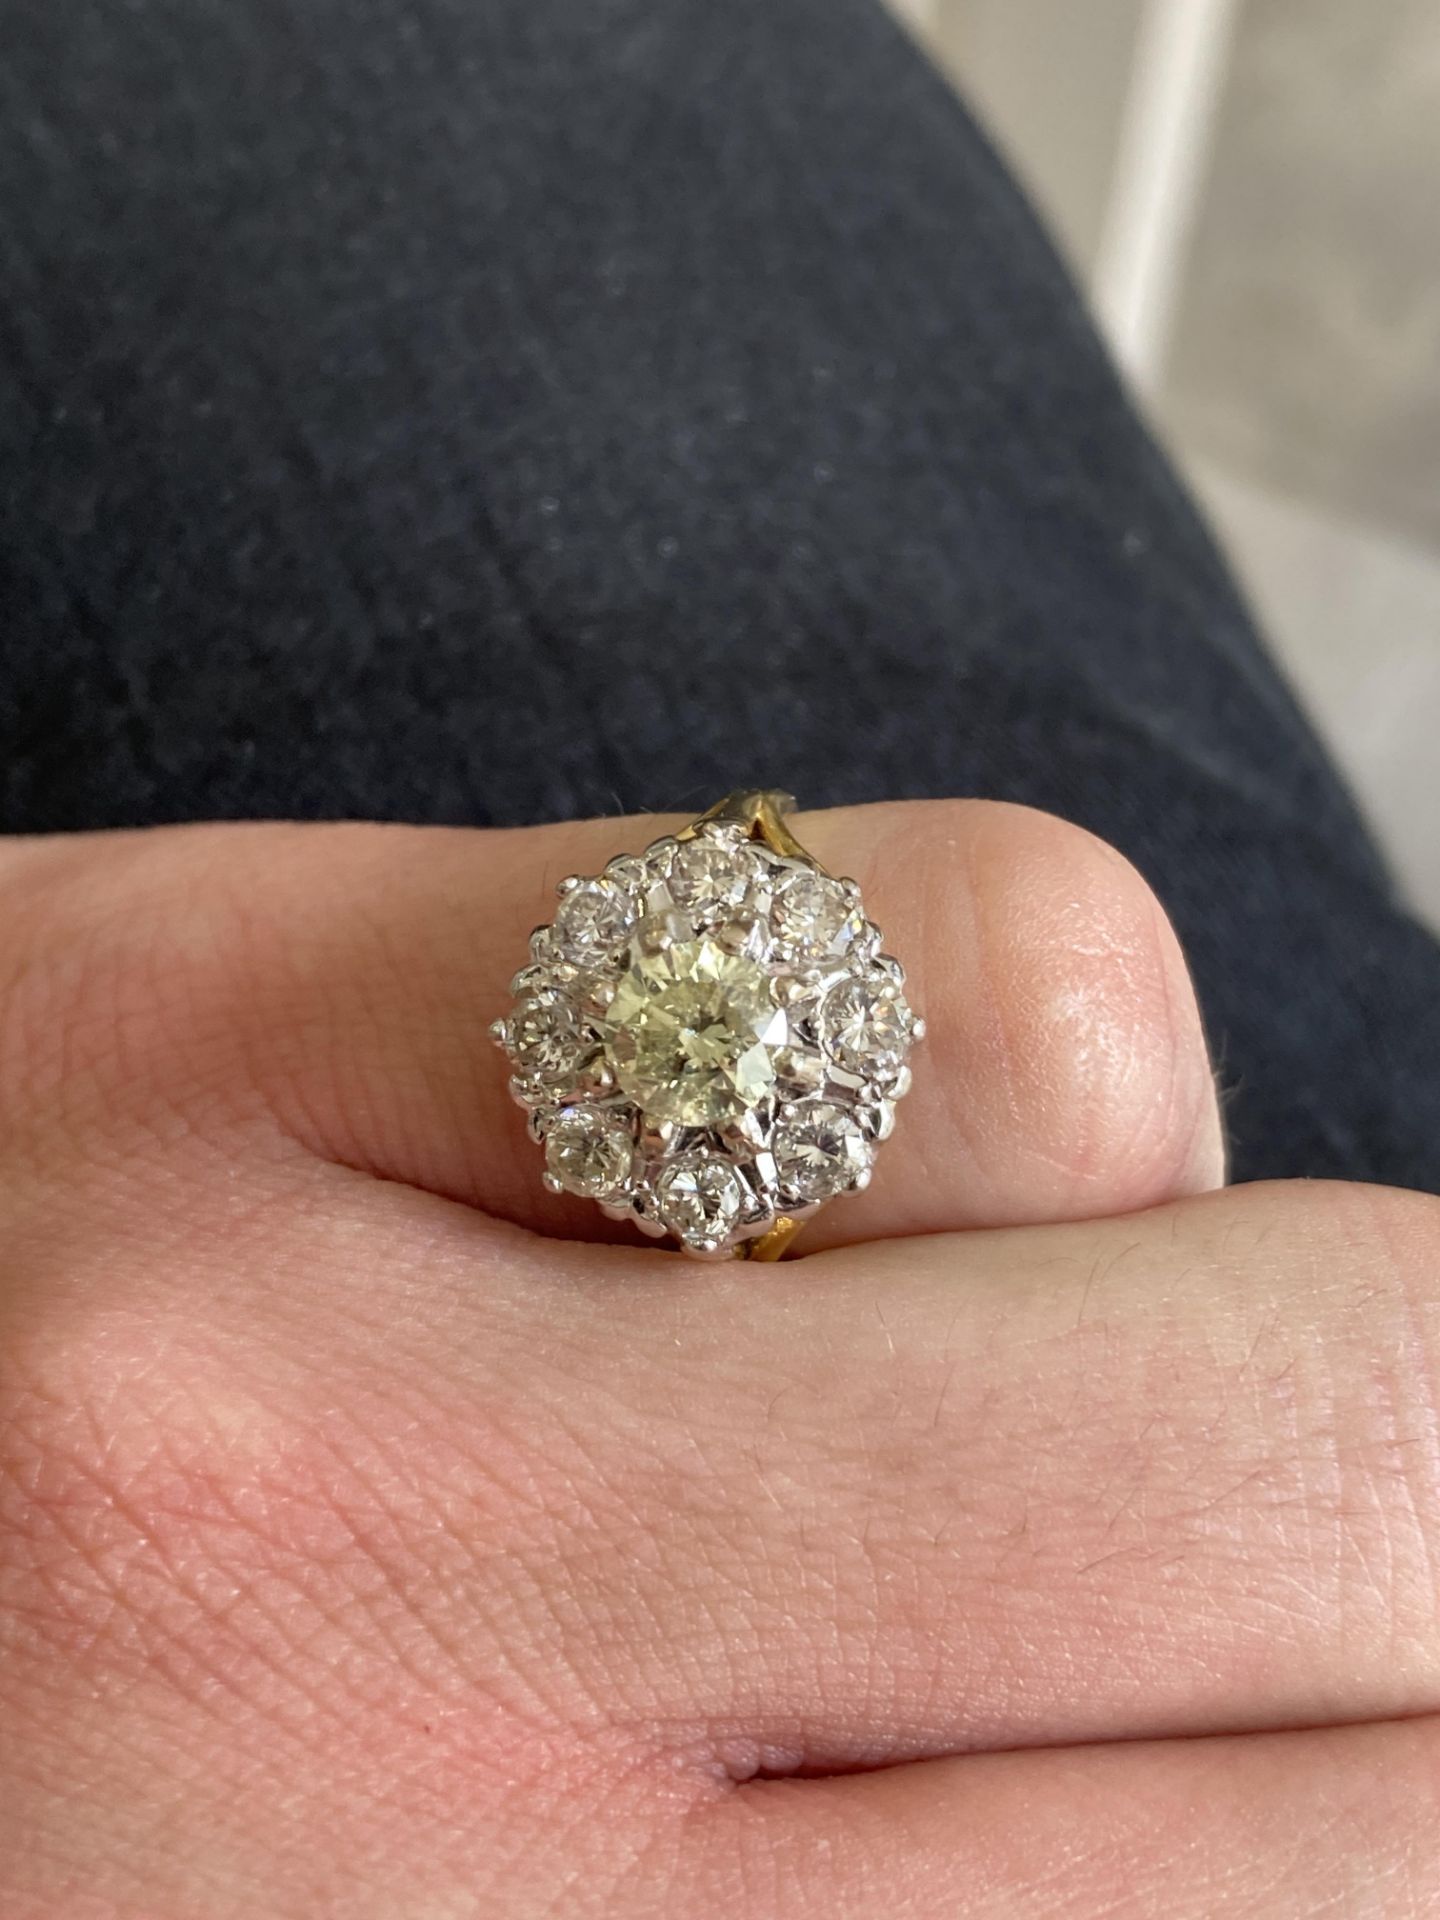 18k Gold & Diamond Ring Approx 1.3ct Total - Appears Fancy Yellow Centre Stone (Size: N) - Image 3 of 9